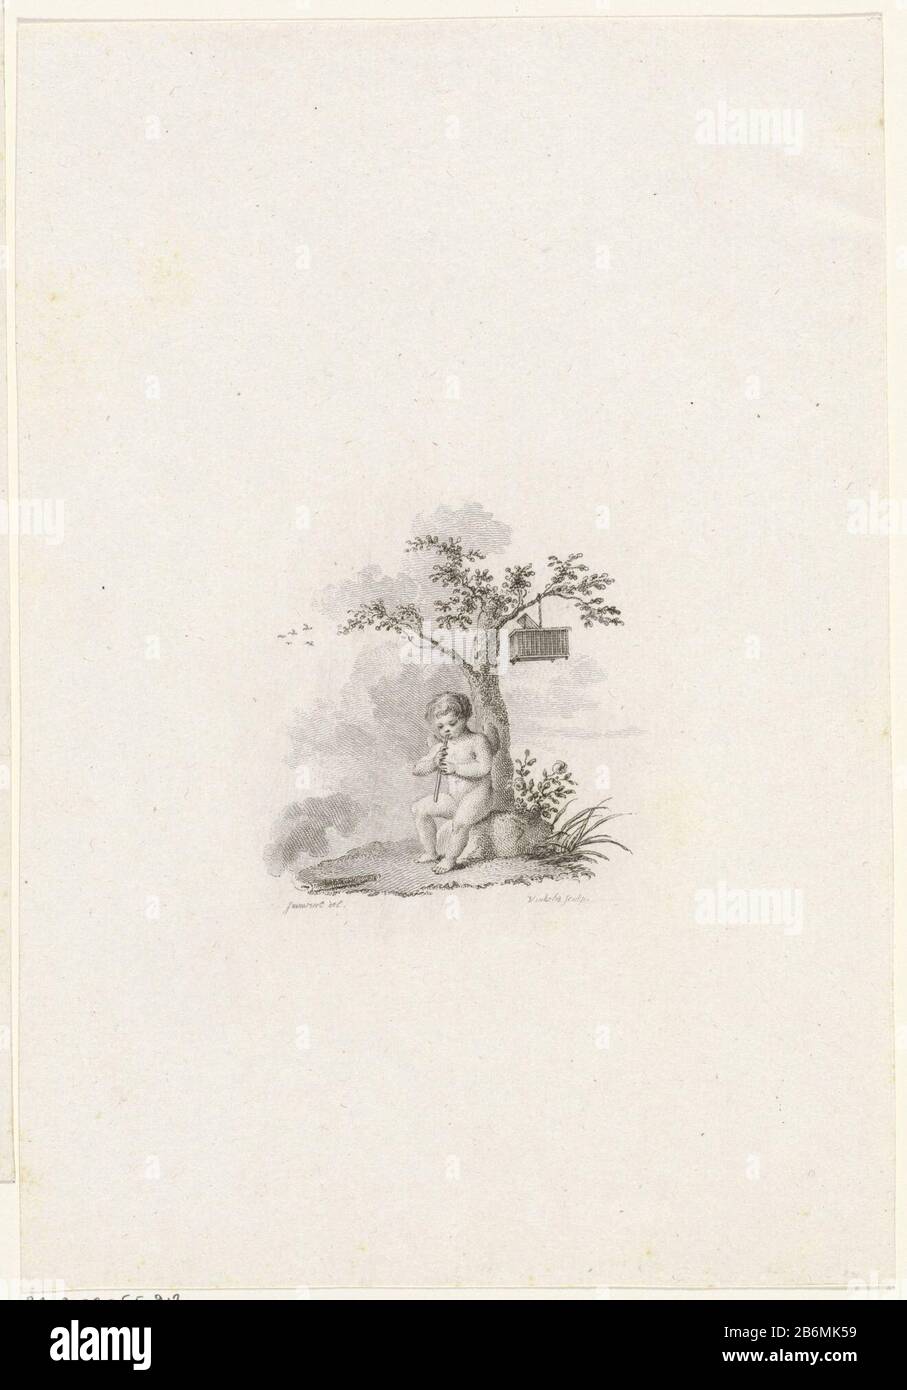 Fluitspelende putto onder een boom Flute playing putto under a tree object type: picture Item number: RP-P-OB-65.913 Inscriptions / Brands: collector's mark, verso, stamped: Lugt 2228 Manufacturer : printmaker: Reinier Vinkeles (I) (listed building) for drawing of: Immerzeel (indicated on object) Place manufacture: Amsterdam Date: 1751 - 1816 Physical characteristics: etching and engra material: paper Technique: etching / engra (printing process) Measurements: sheet: h 240 mm × W 166 mm Subject: cupids: 'amores',' amoretti '' putti'flute, aulos, tibiaempty birdcage tree Stock Photo